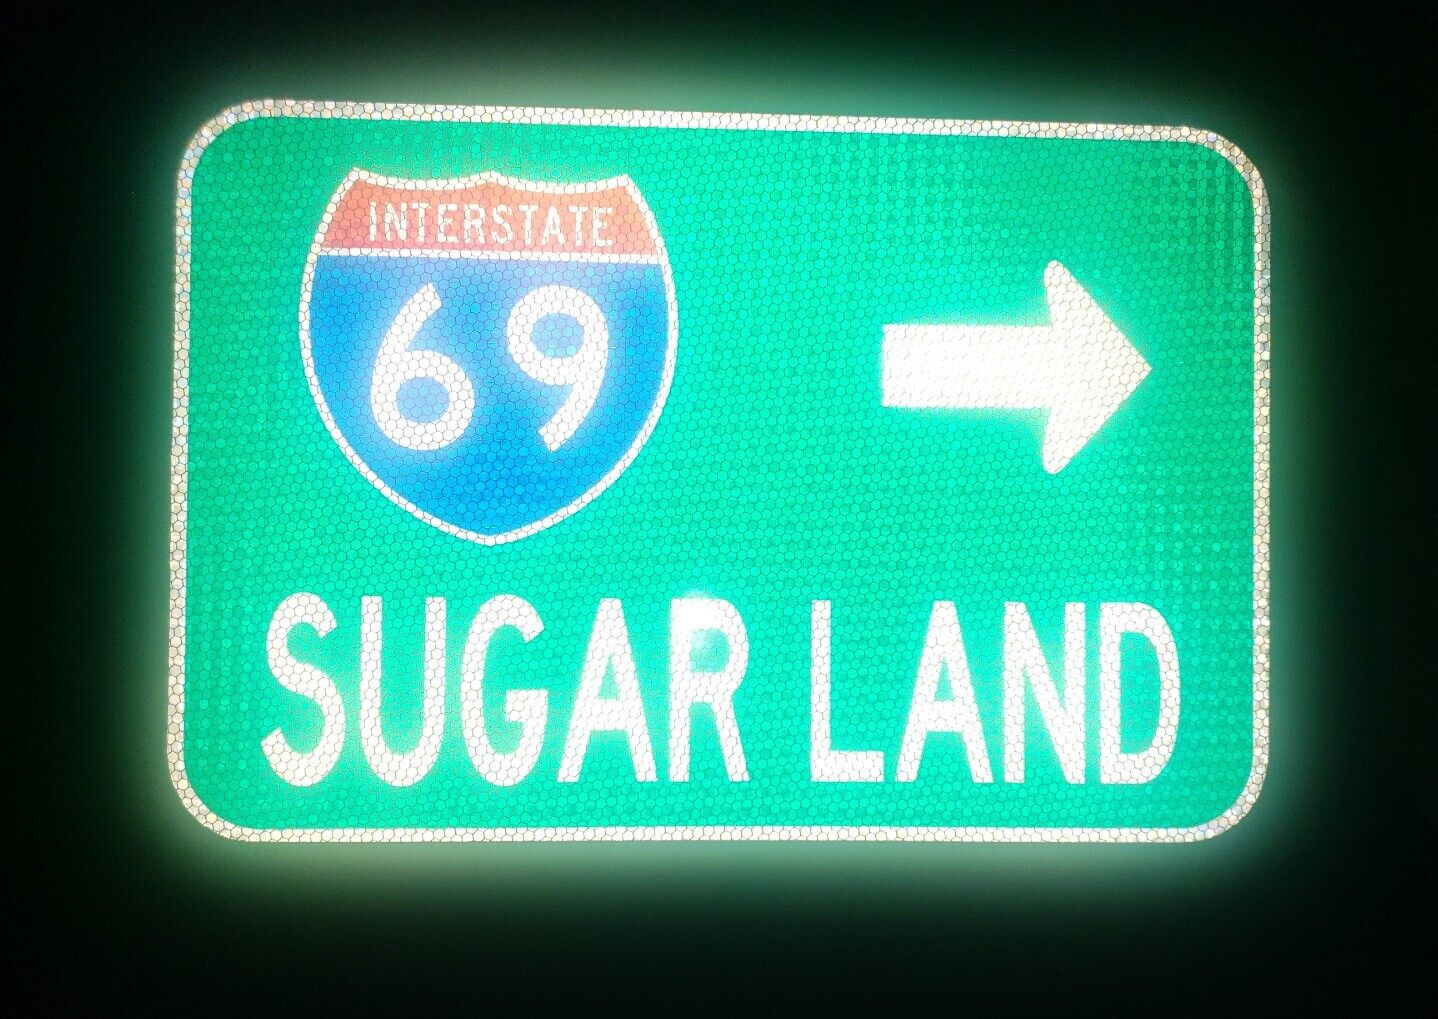 SUGAR LAND Interstate 69 route road sign, Texas, Houston, Pearland